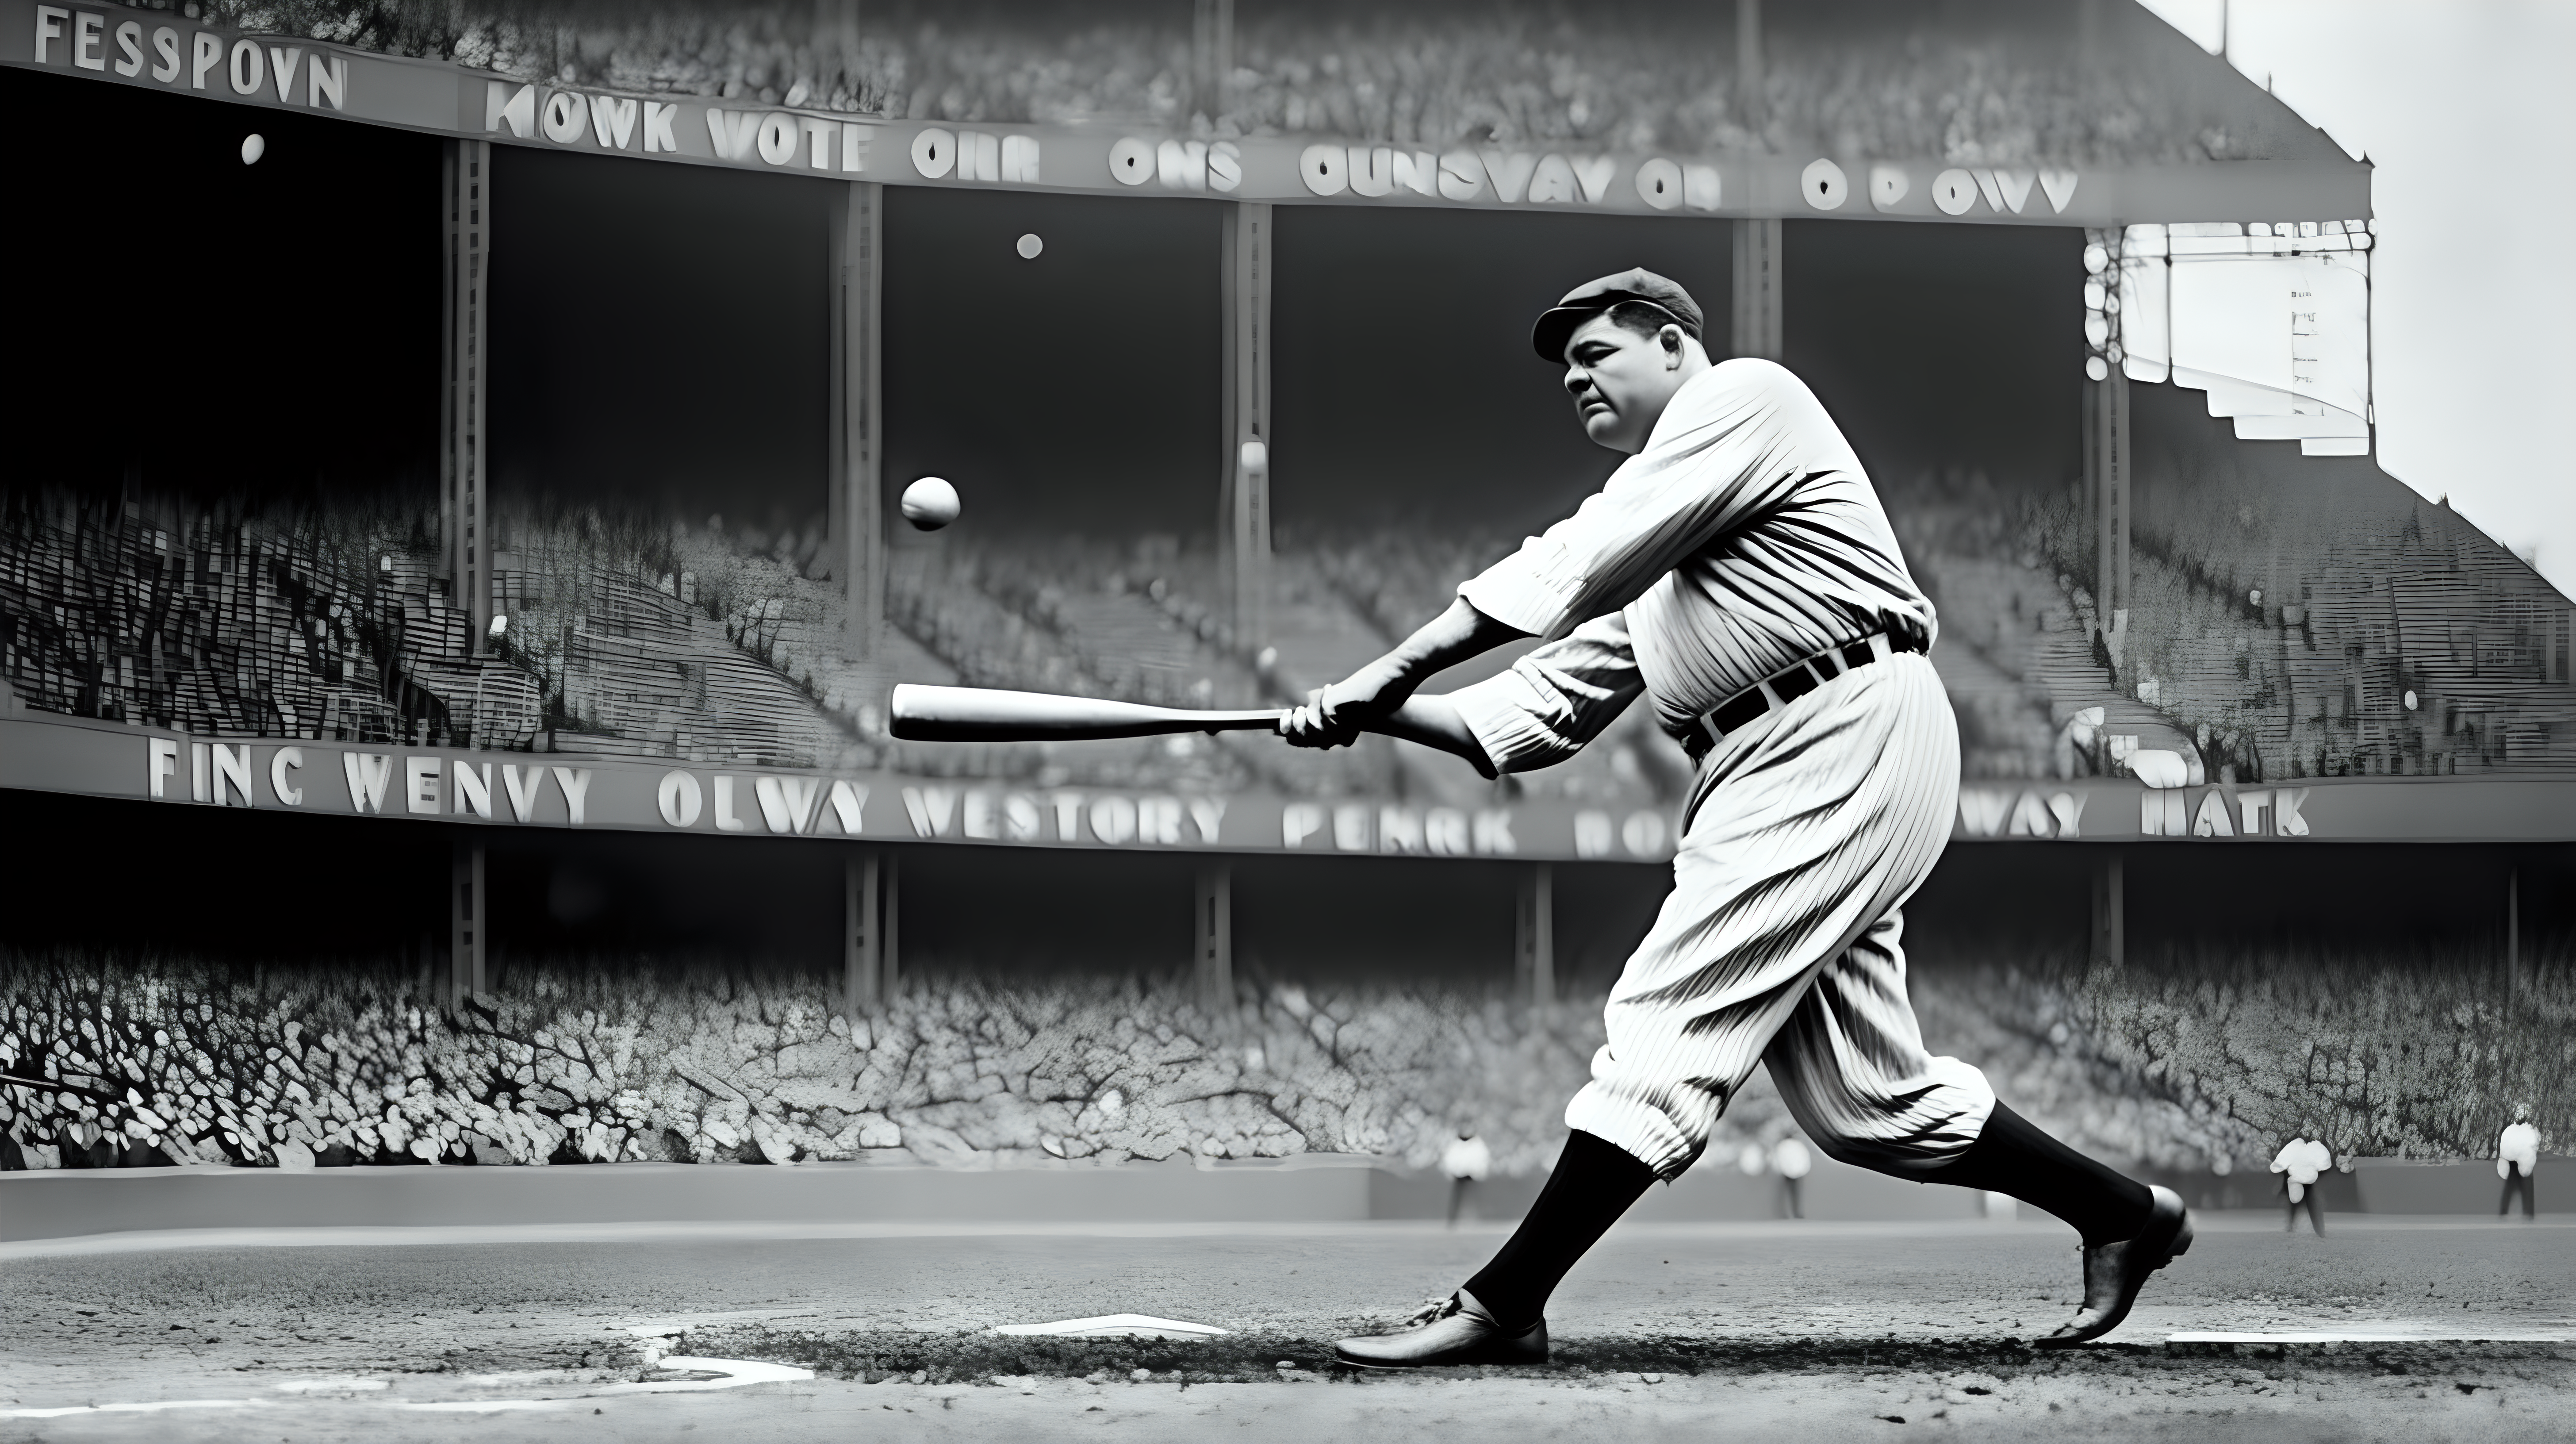 Babe Ruth hitting a ball over Fenway Park